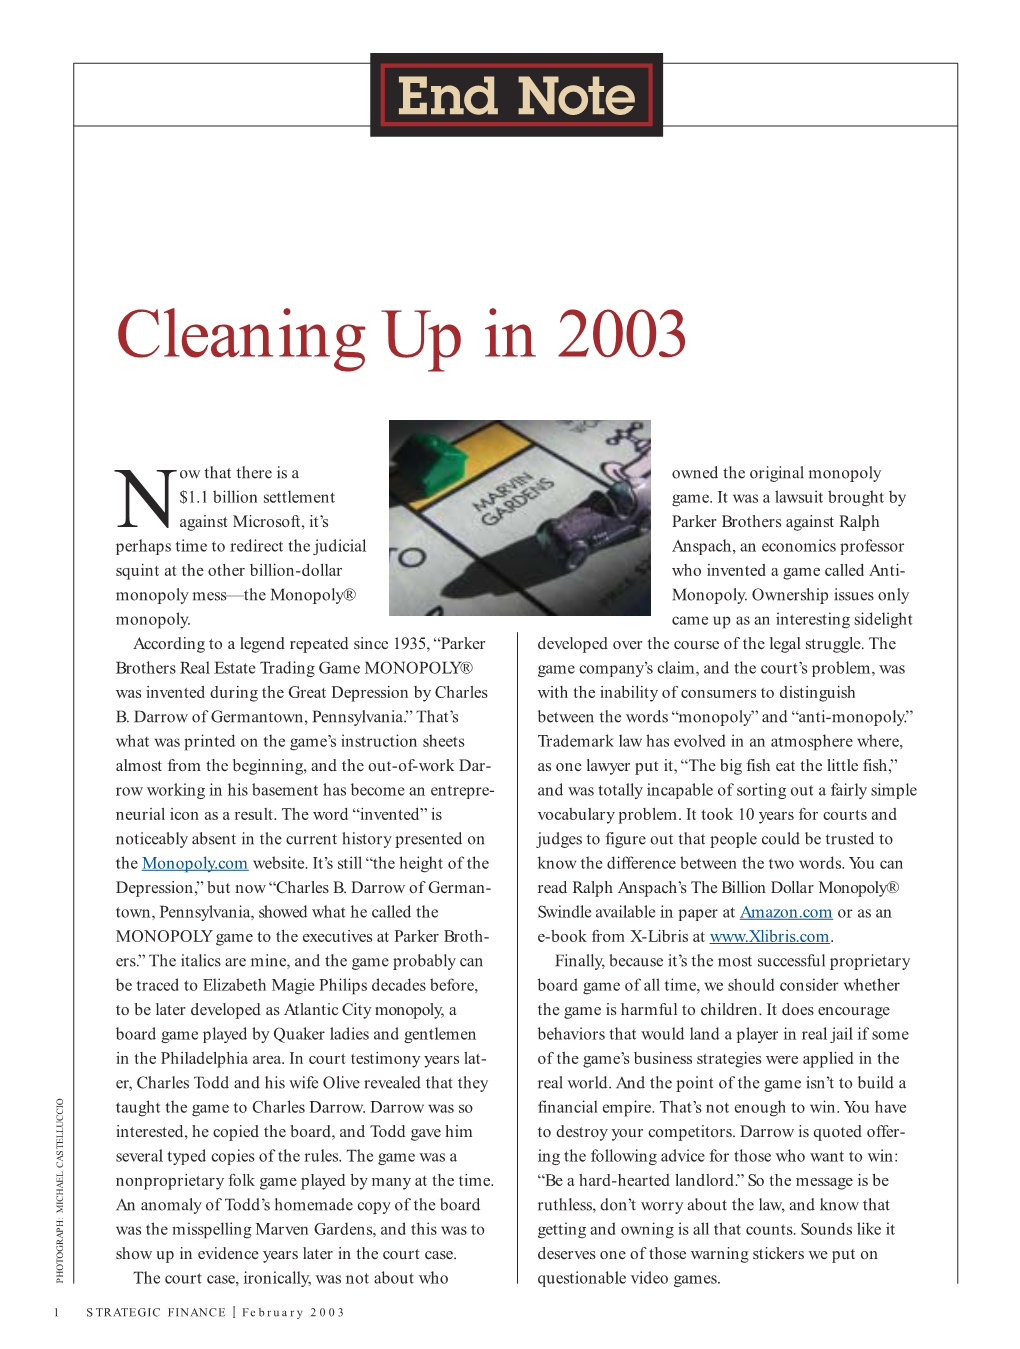 Cleaning up in 2003